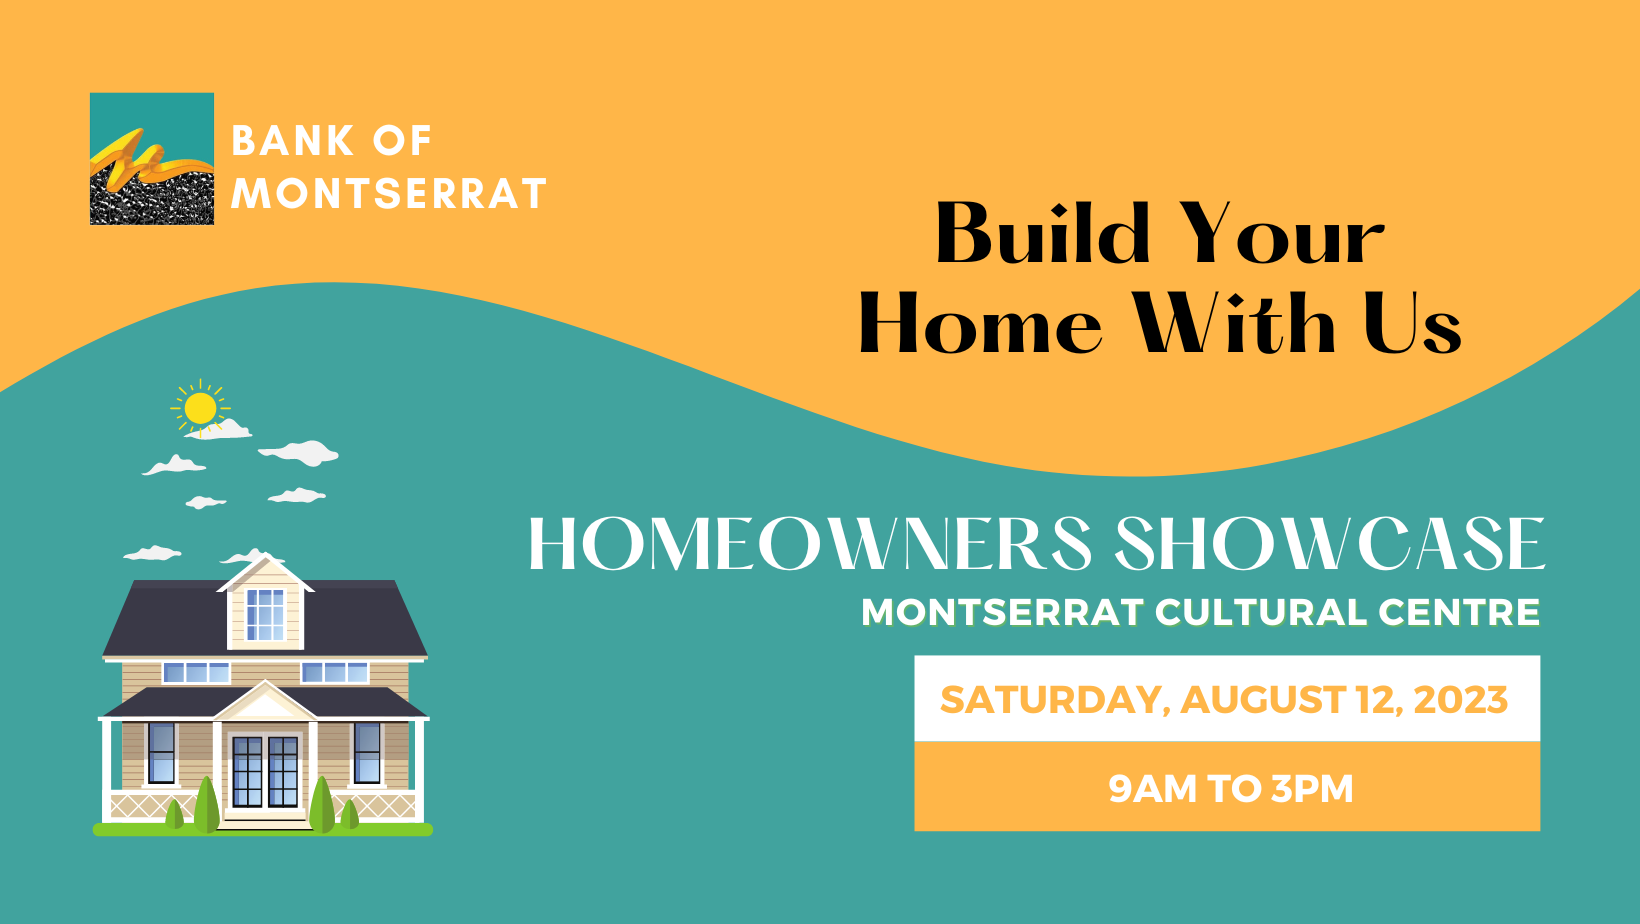 Bank of Montserrat to Host Homeowners Showcase on Saturday